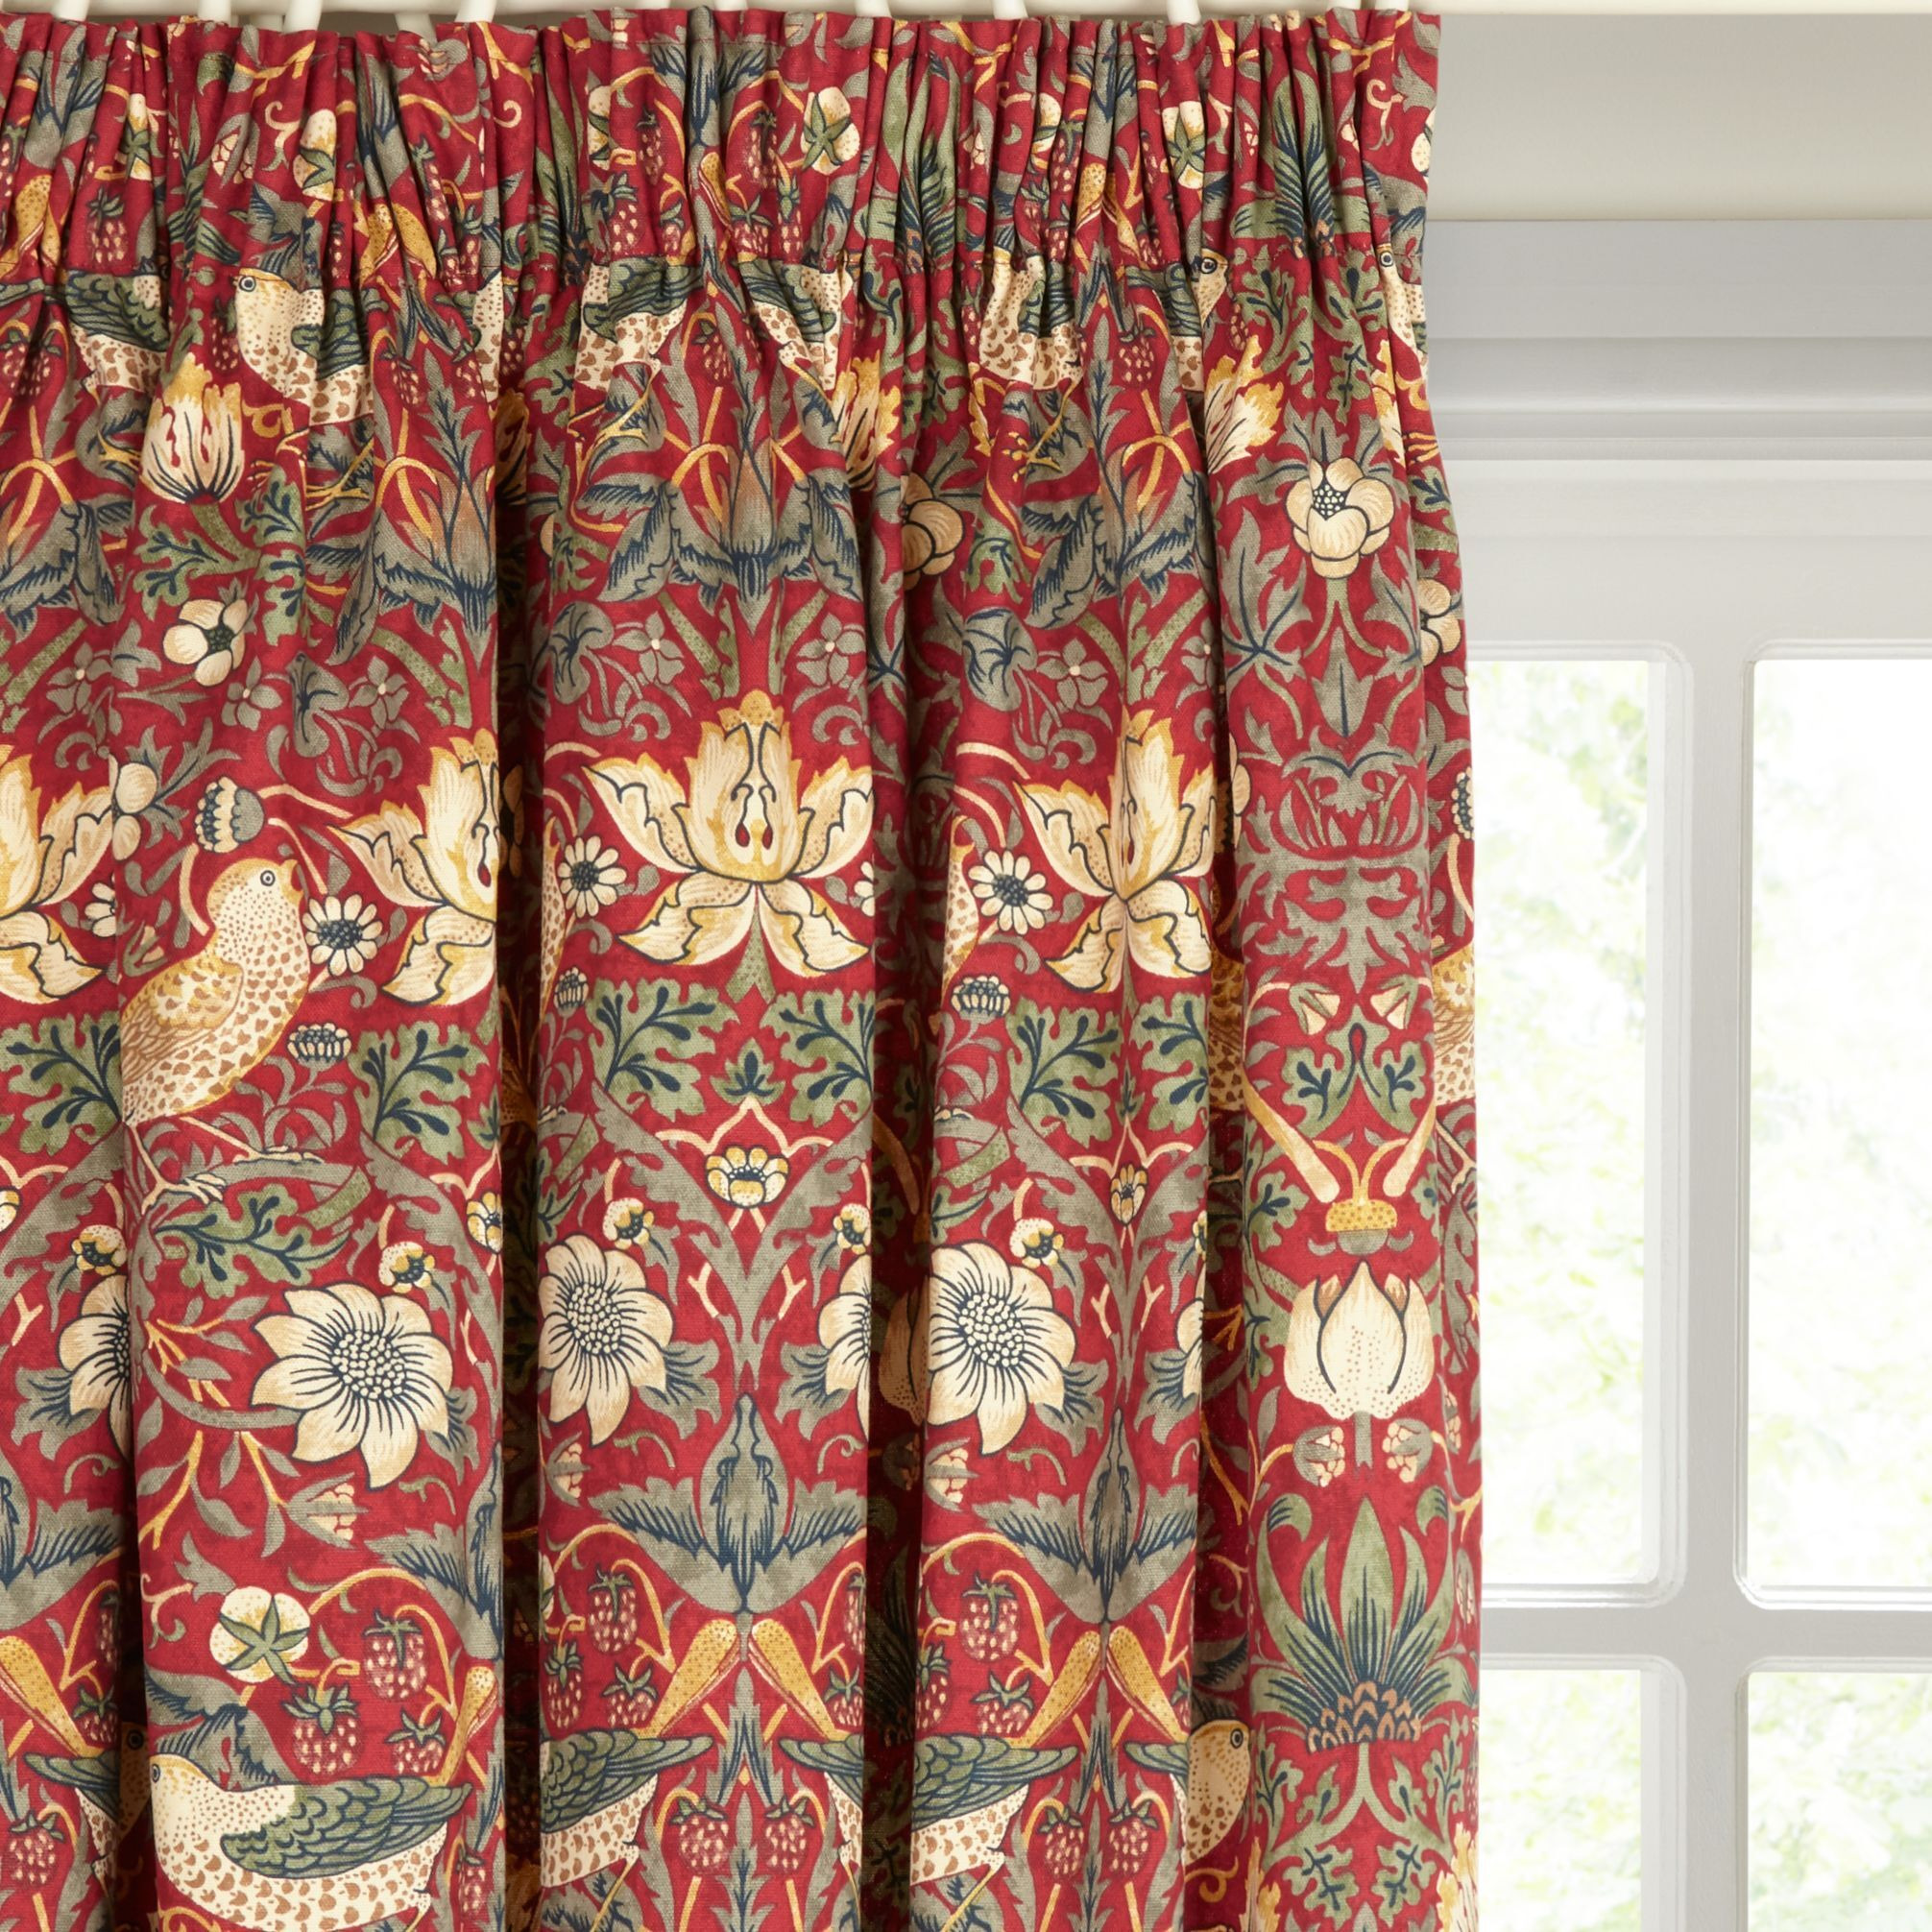 Morris & Co. Strawberry Thief Pair Lined Pencil Pleat Curtains, Red - image 1